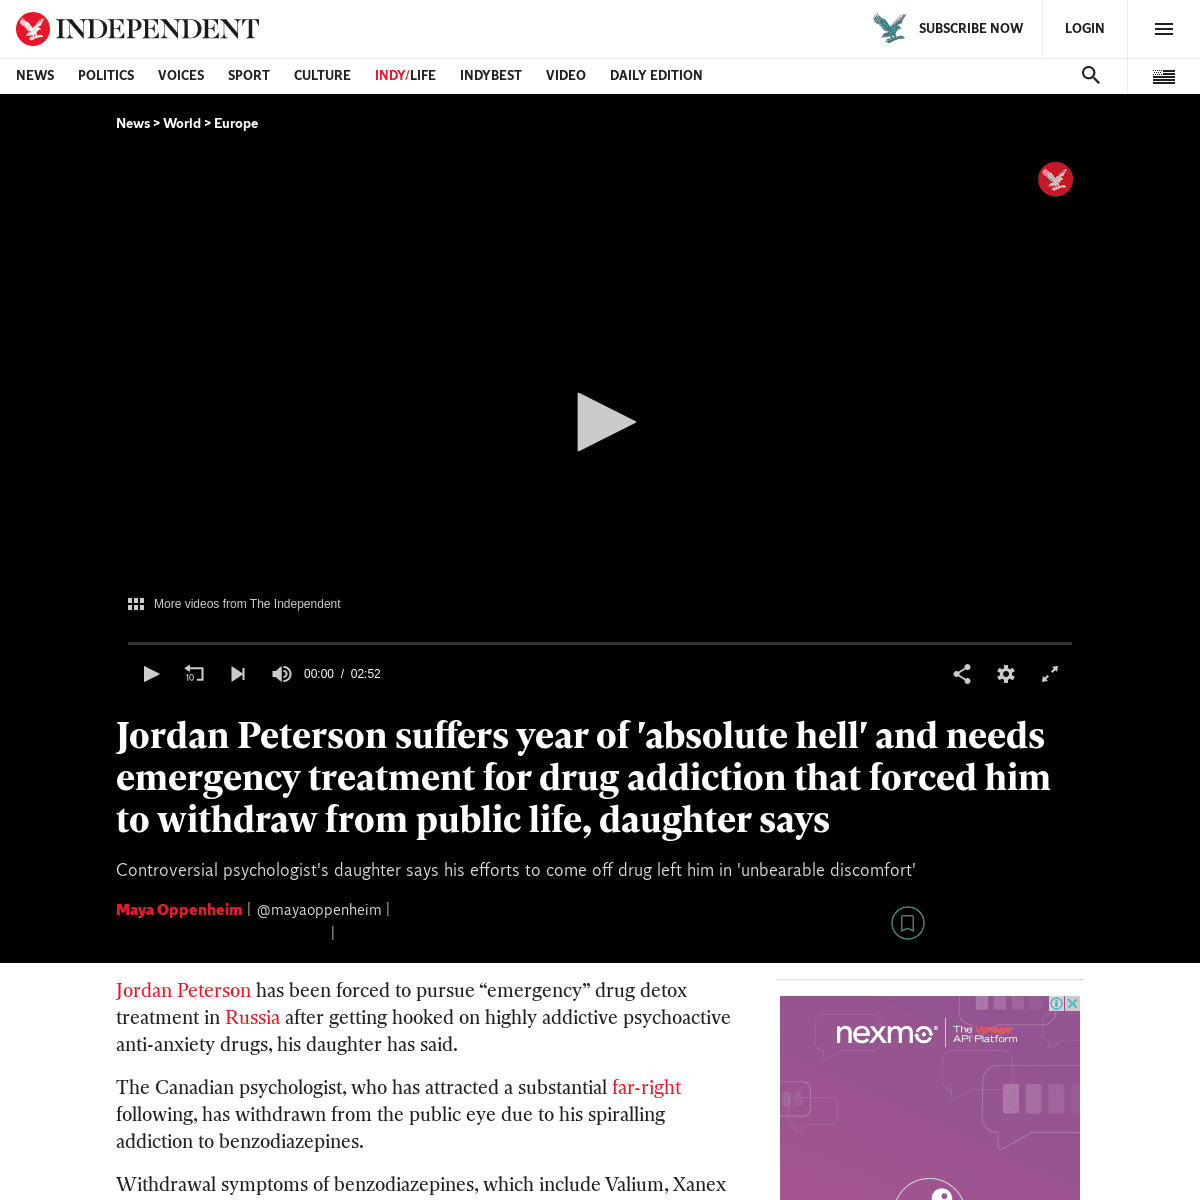 A complete backup of www.independent.co.uk/news/world/europe/jordan-peterson-drug-addiction-benzo-valium-xanex-russia-mikhaila-a